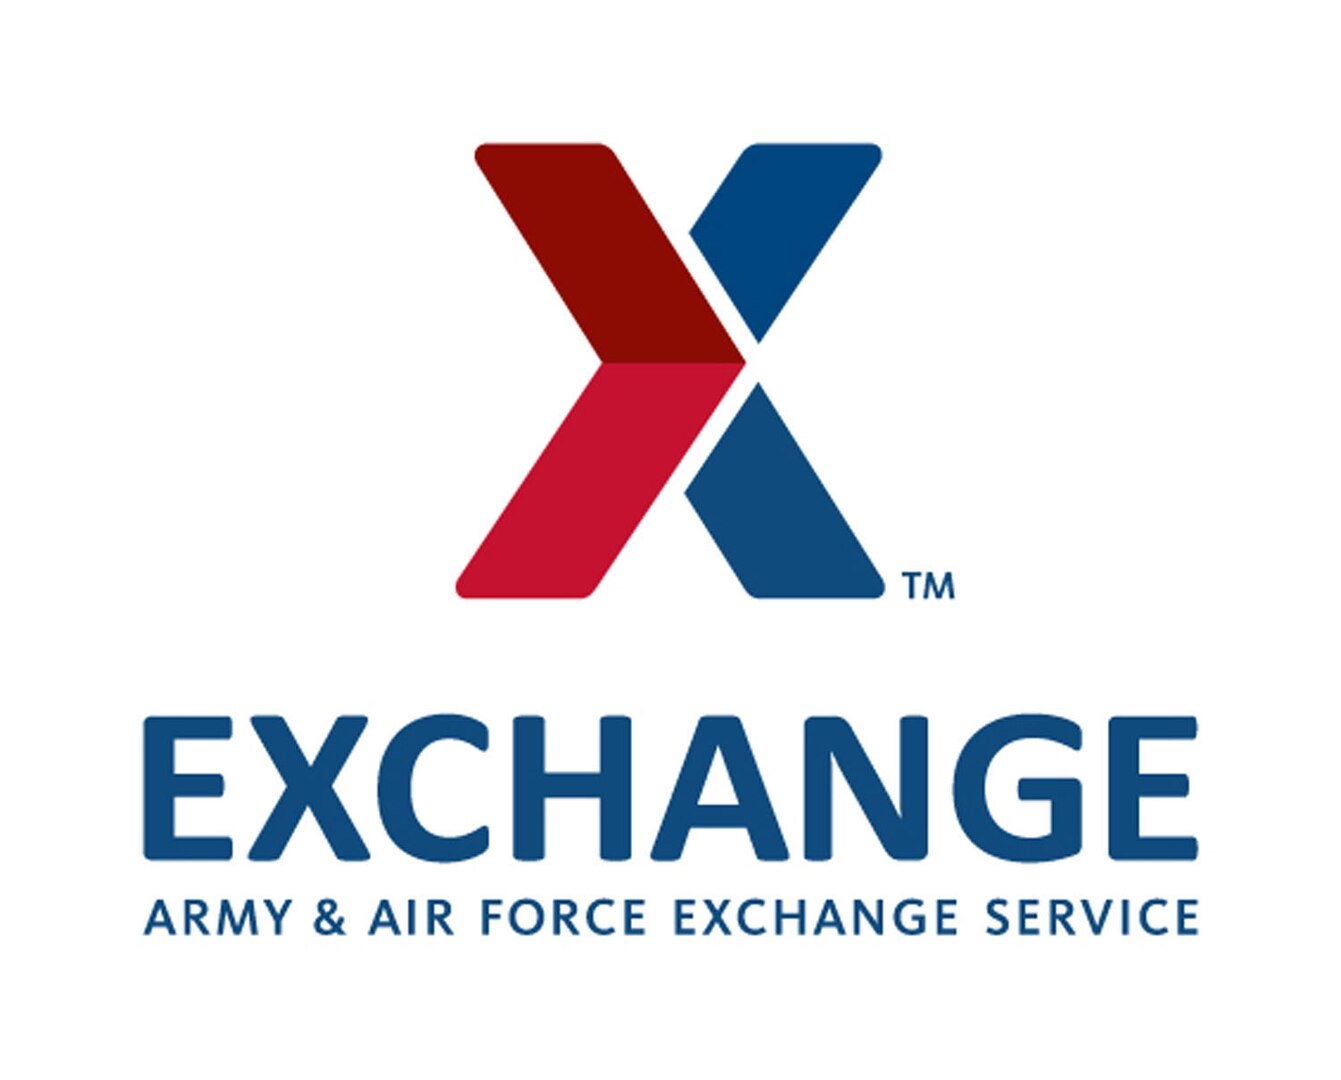 Army & Air Force Exchange Service shoppers can support the military community by donating to the Air Force Assistance Fund and Army Emergency Relief this holiday season.